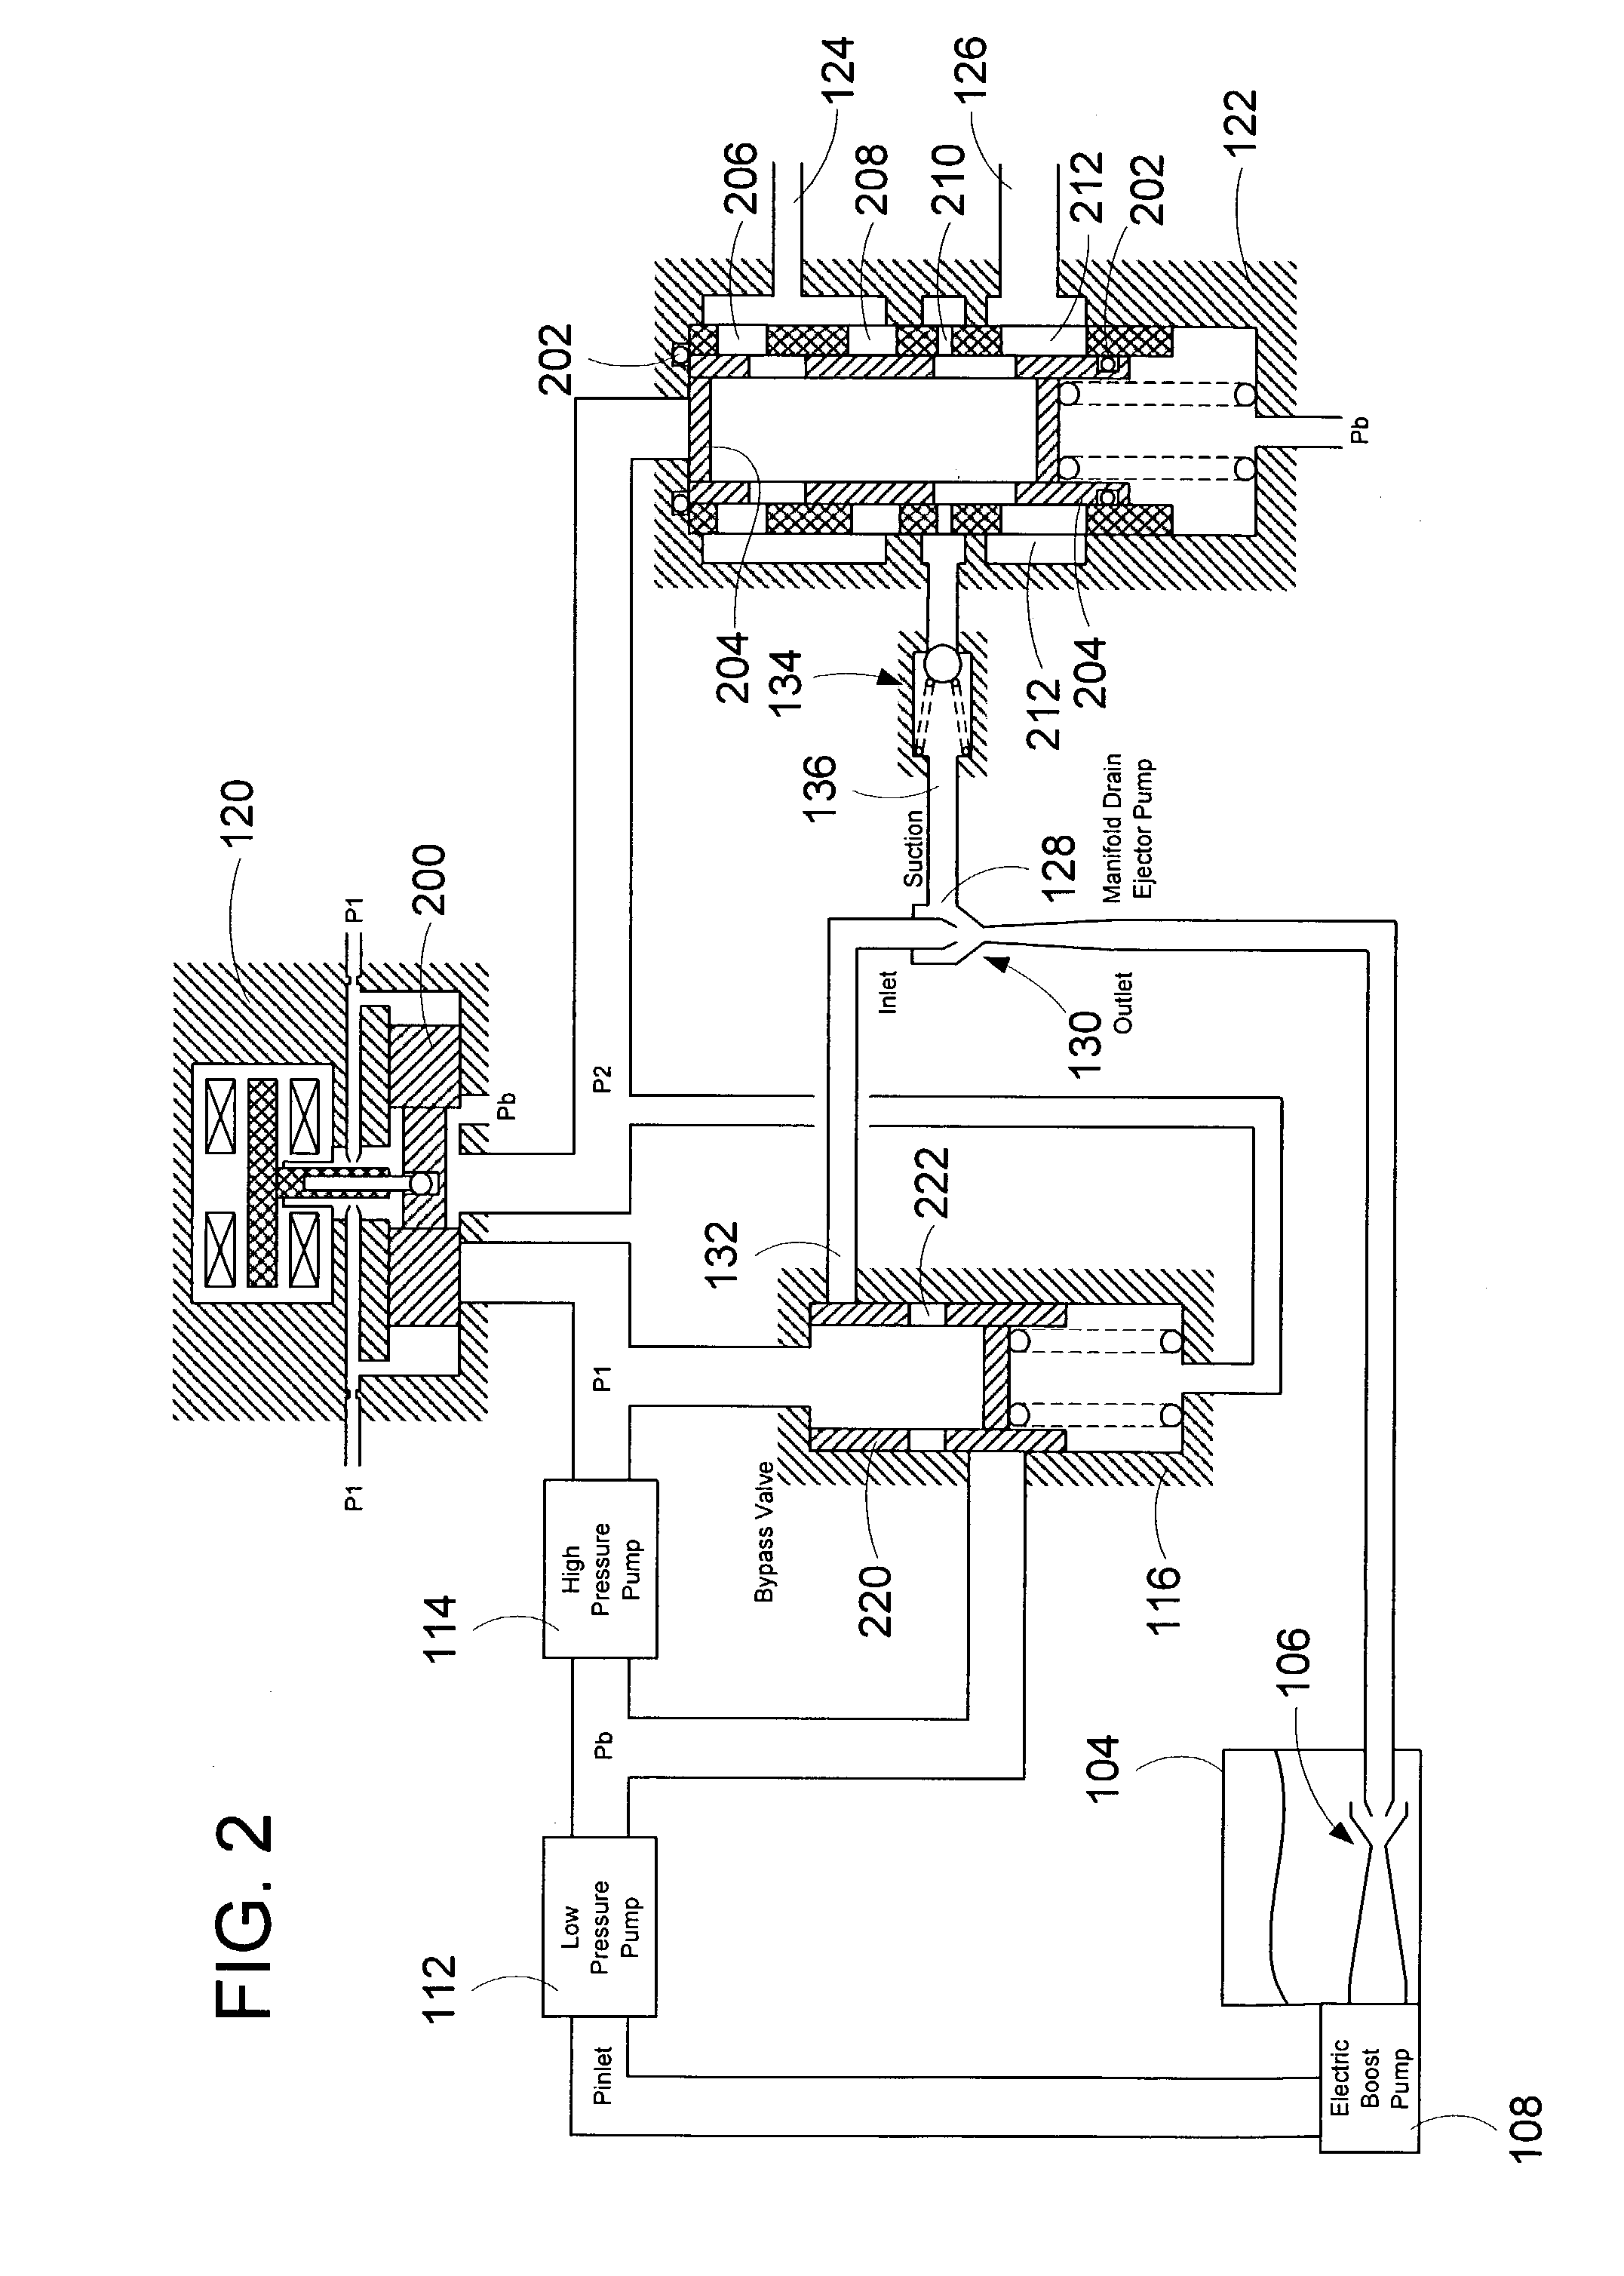 Fuel system for a gas turbine engine